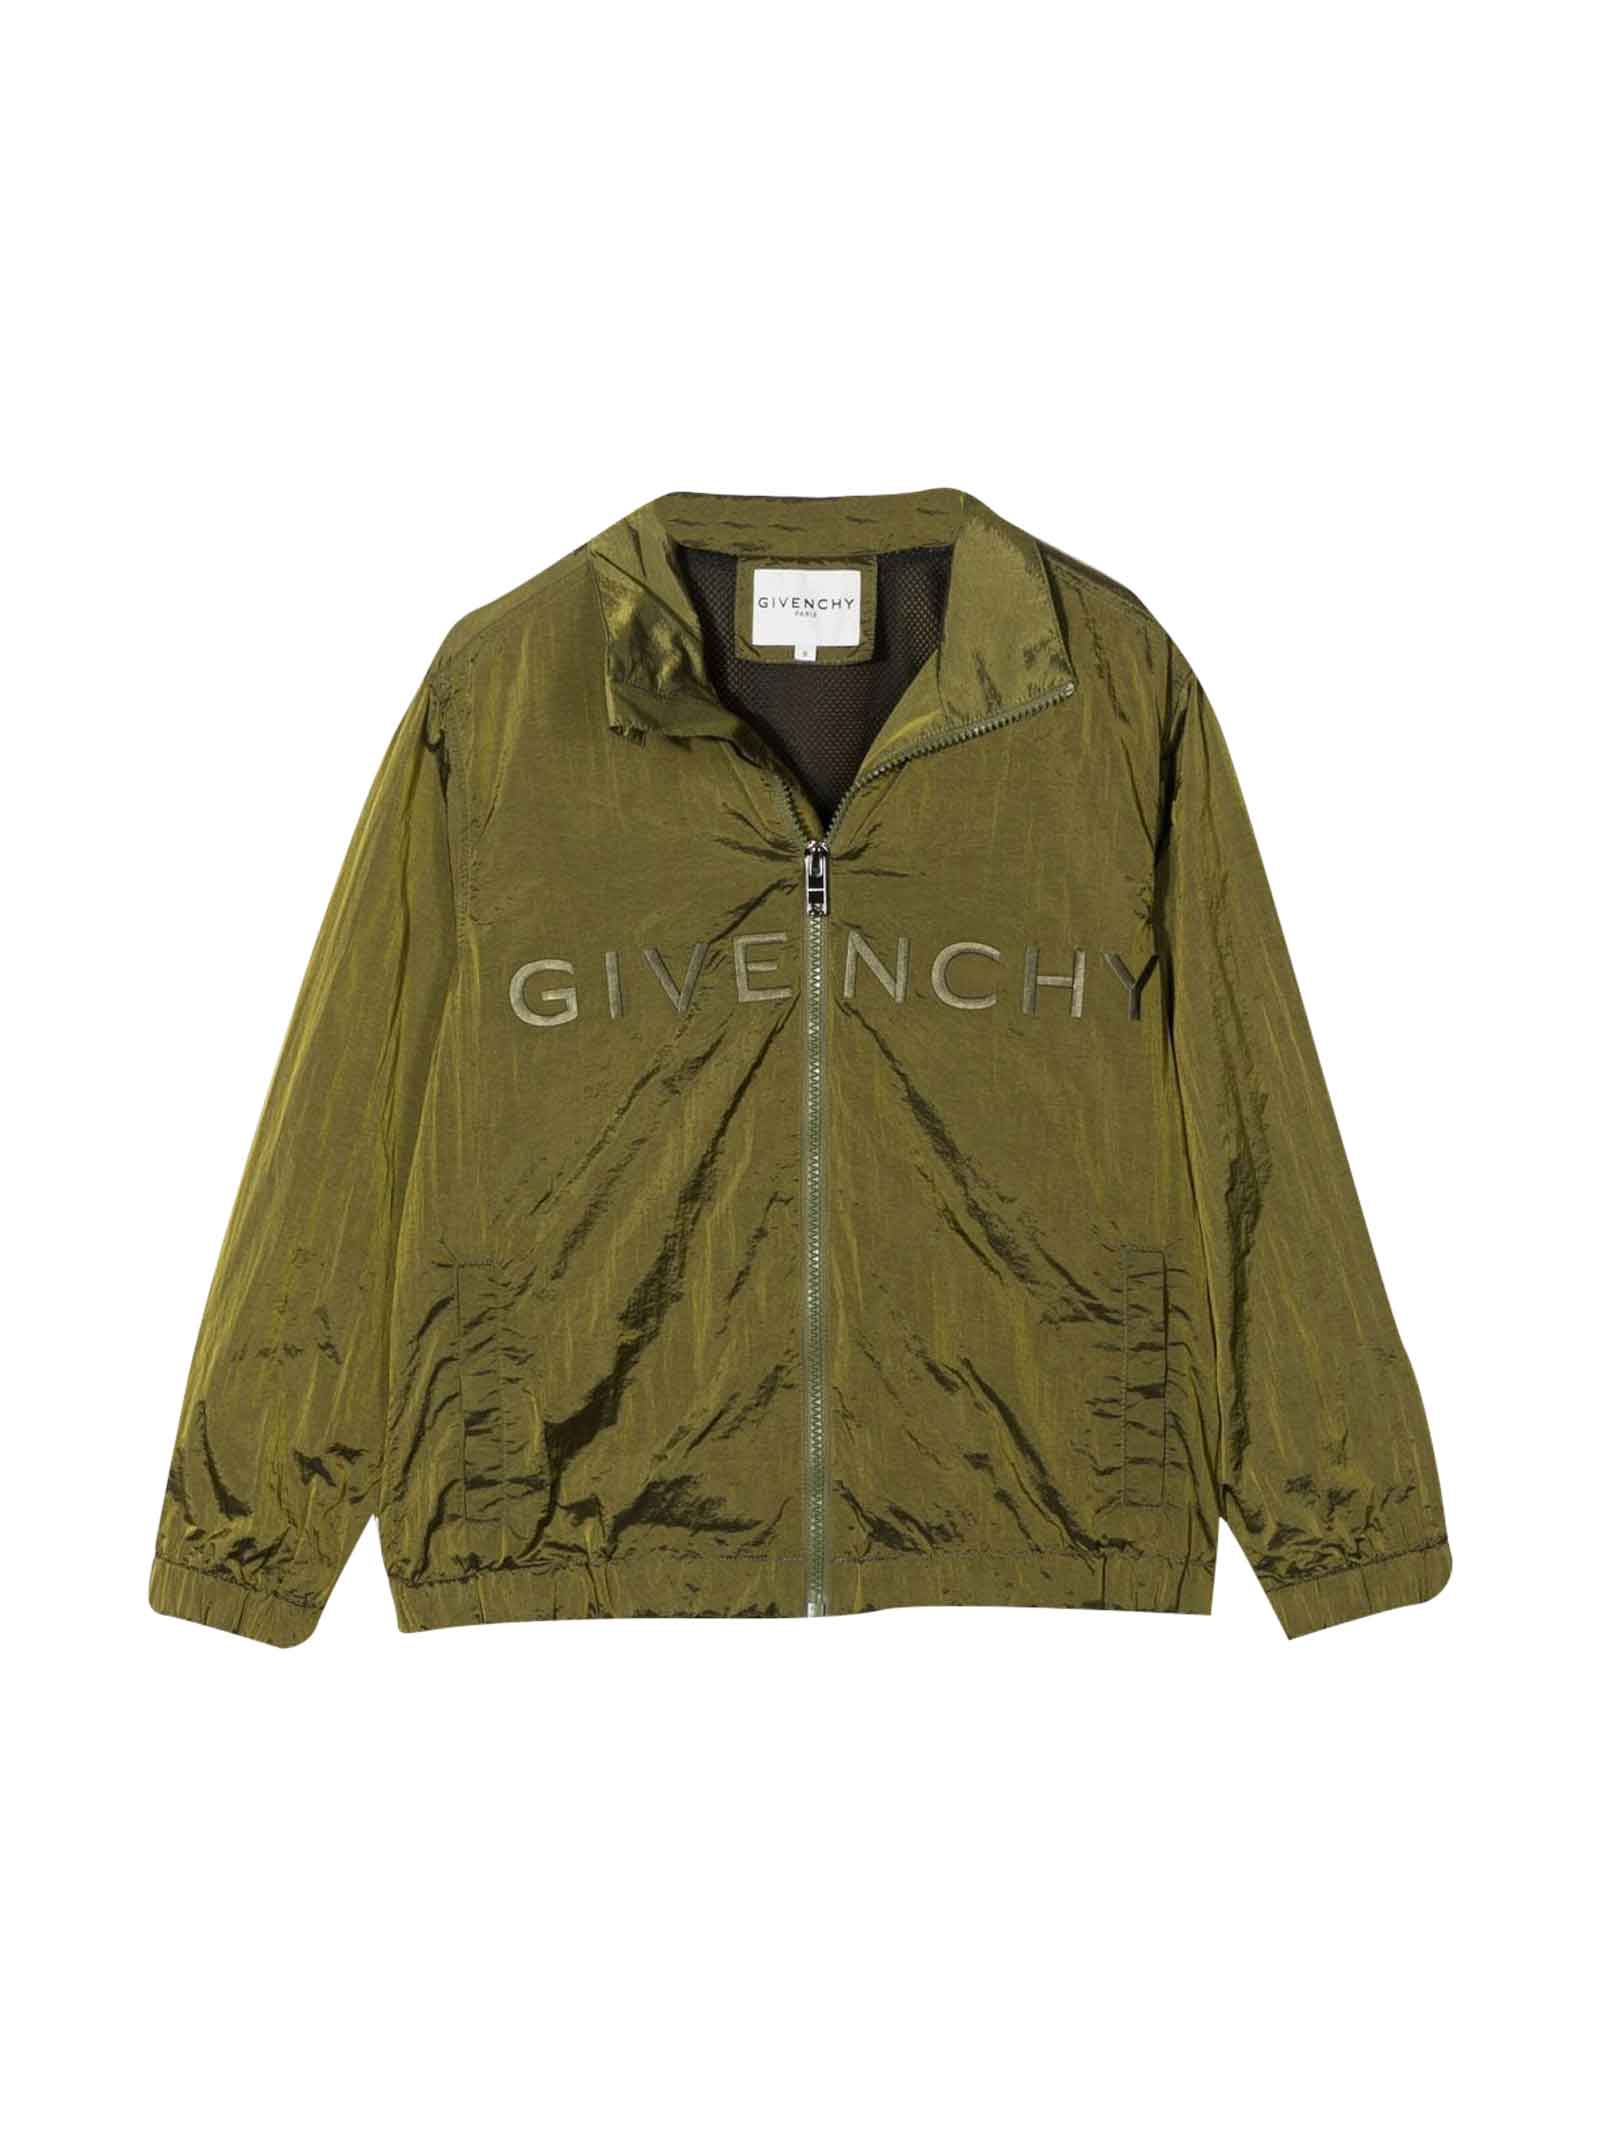 GIVENCHY BOY BOMBER WITH EMBROIDERY BY . EMBROIDERED LOGO ON THE CHEST, EMBROIDERED LOGO ON THE BACK, STAND-U